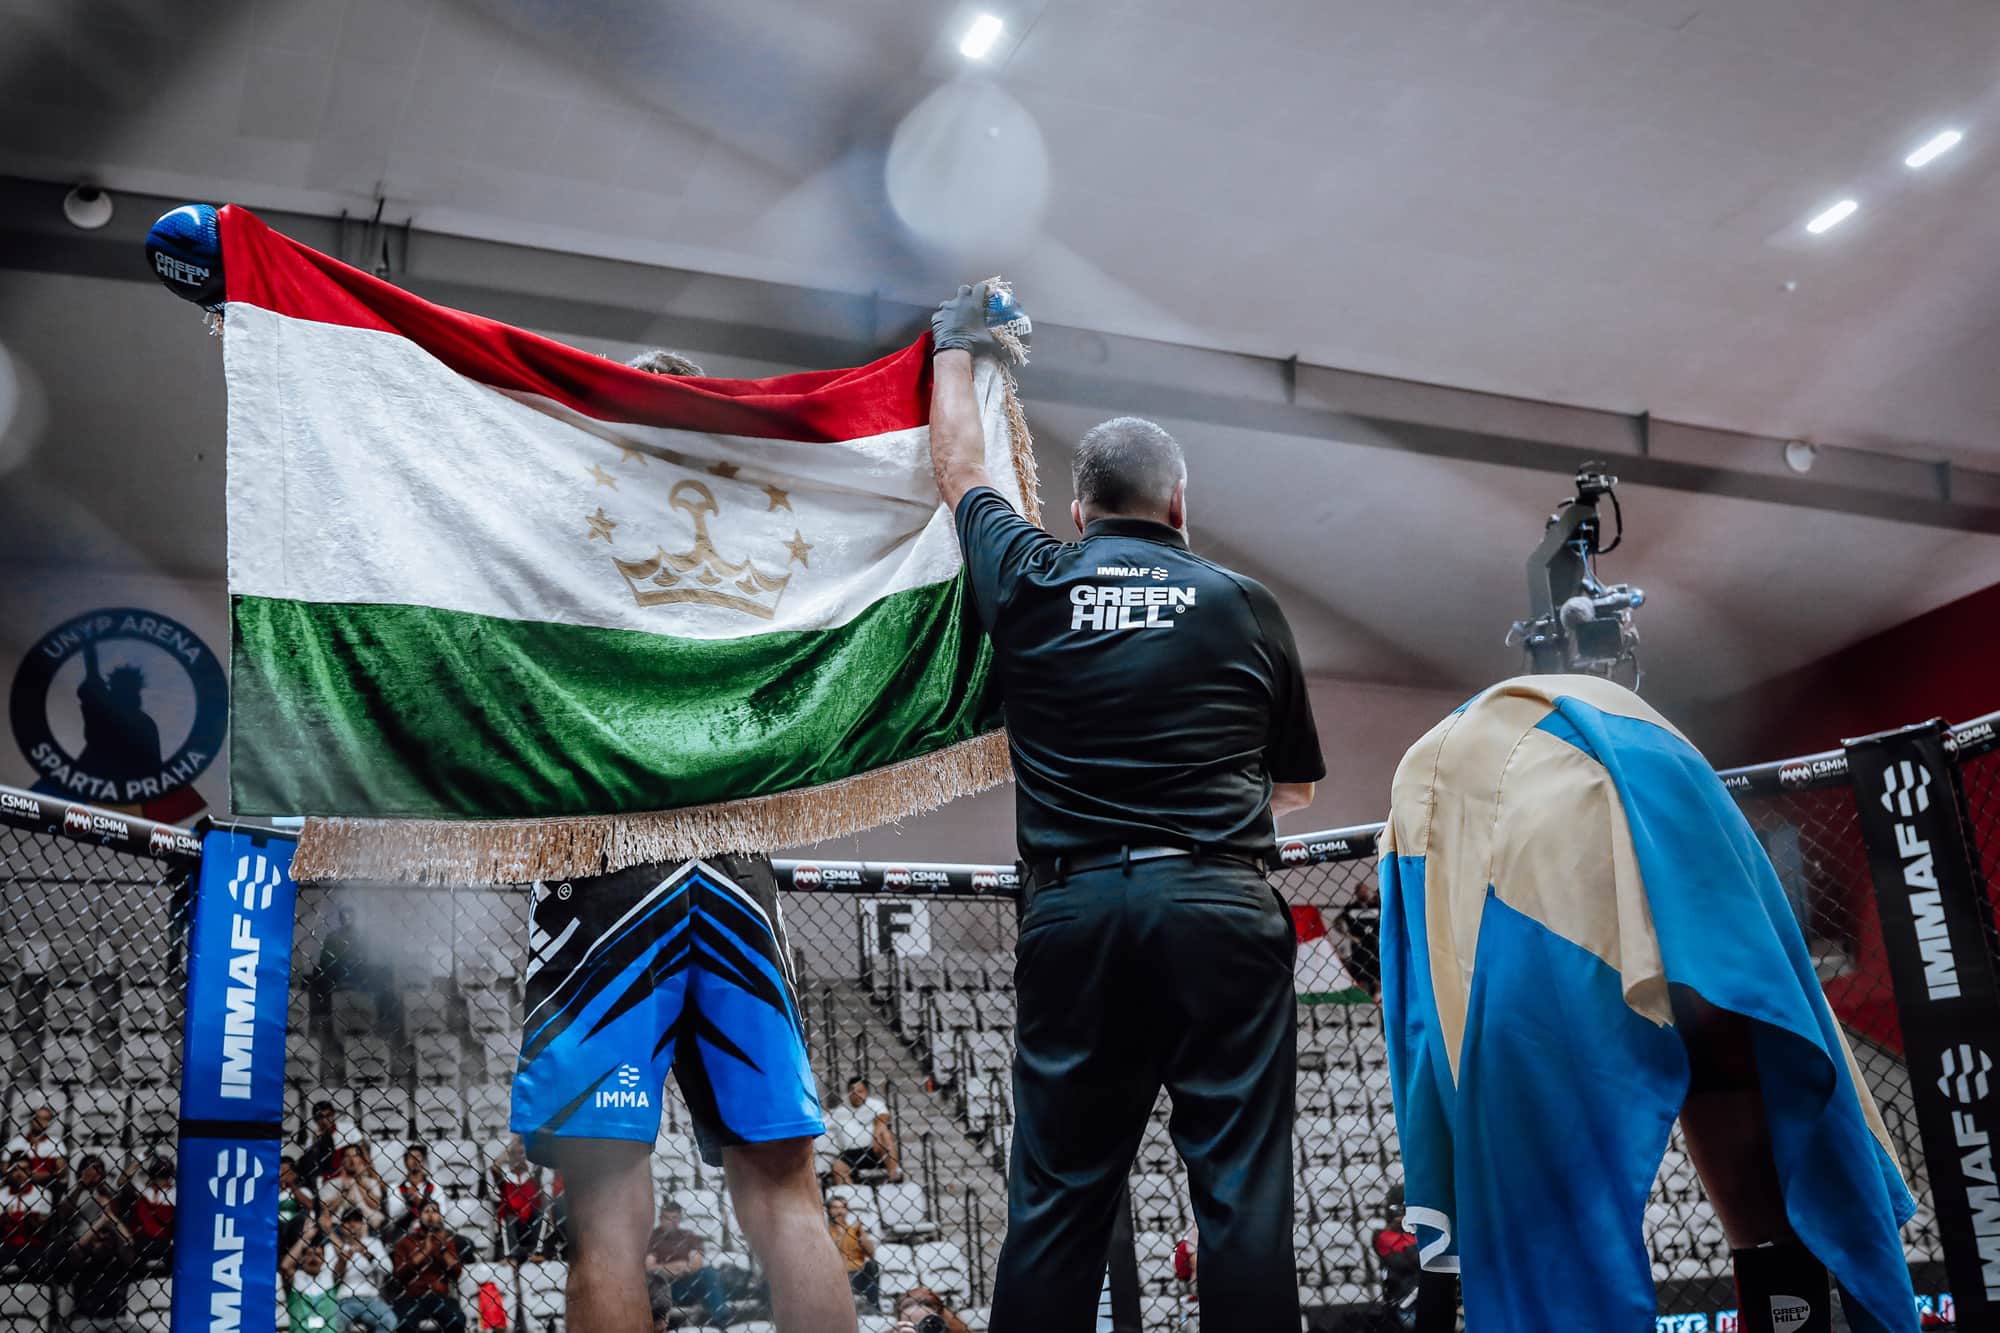 Teams to watch at the IMMAF World Championships: Tajikistan – making great strides in and outside the competition arena